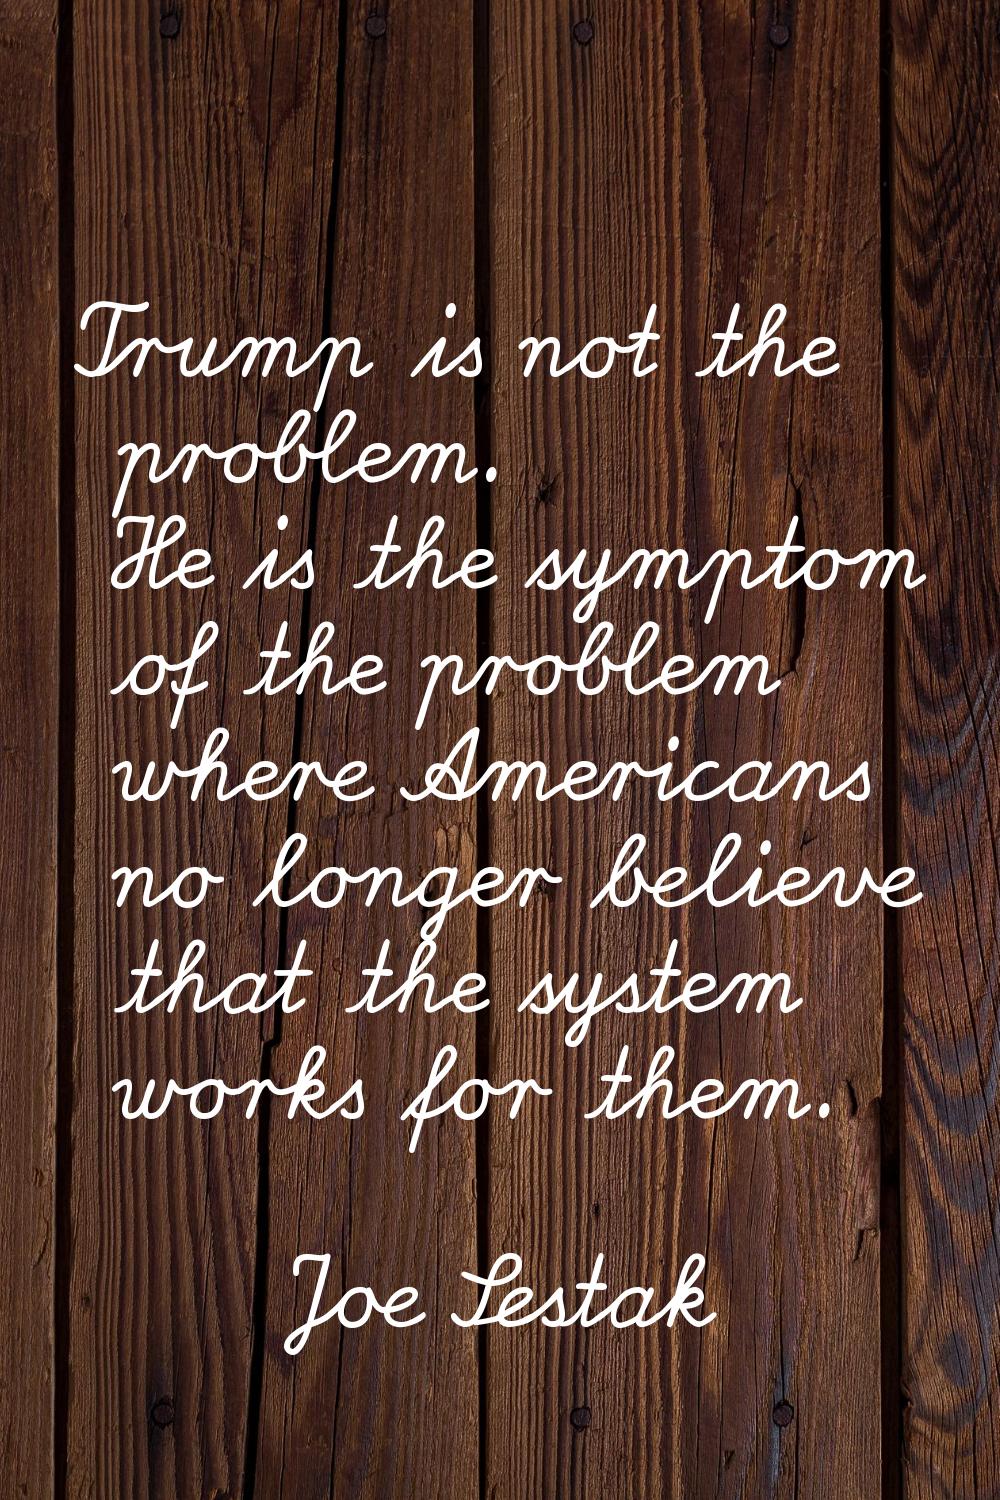 Trump is not the problem. He is the symptom of the problem where Americans no longer believe that t